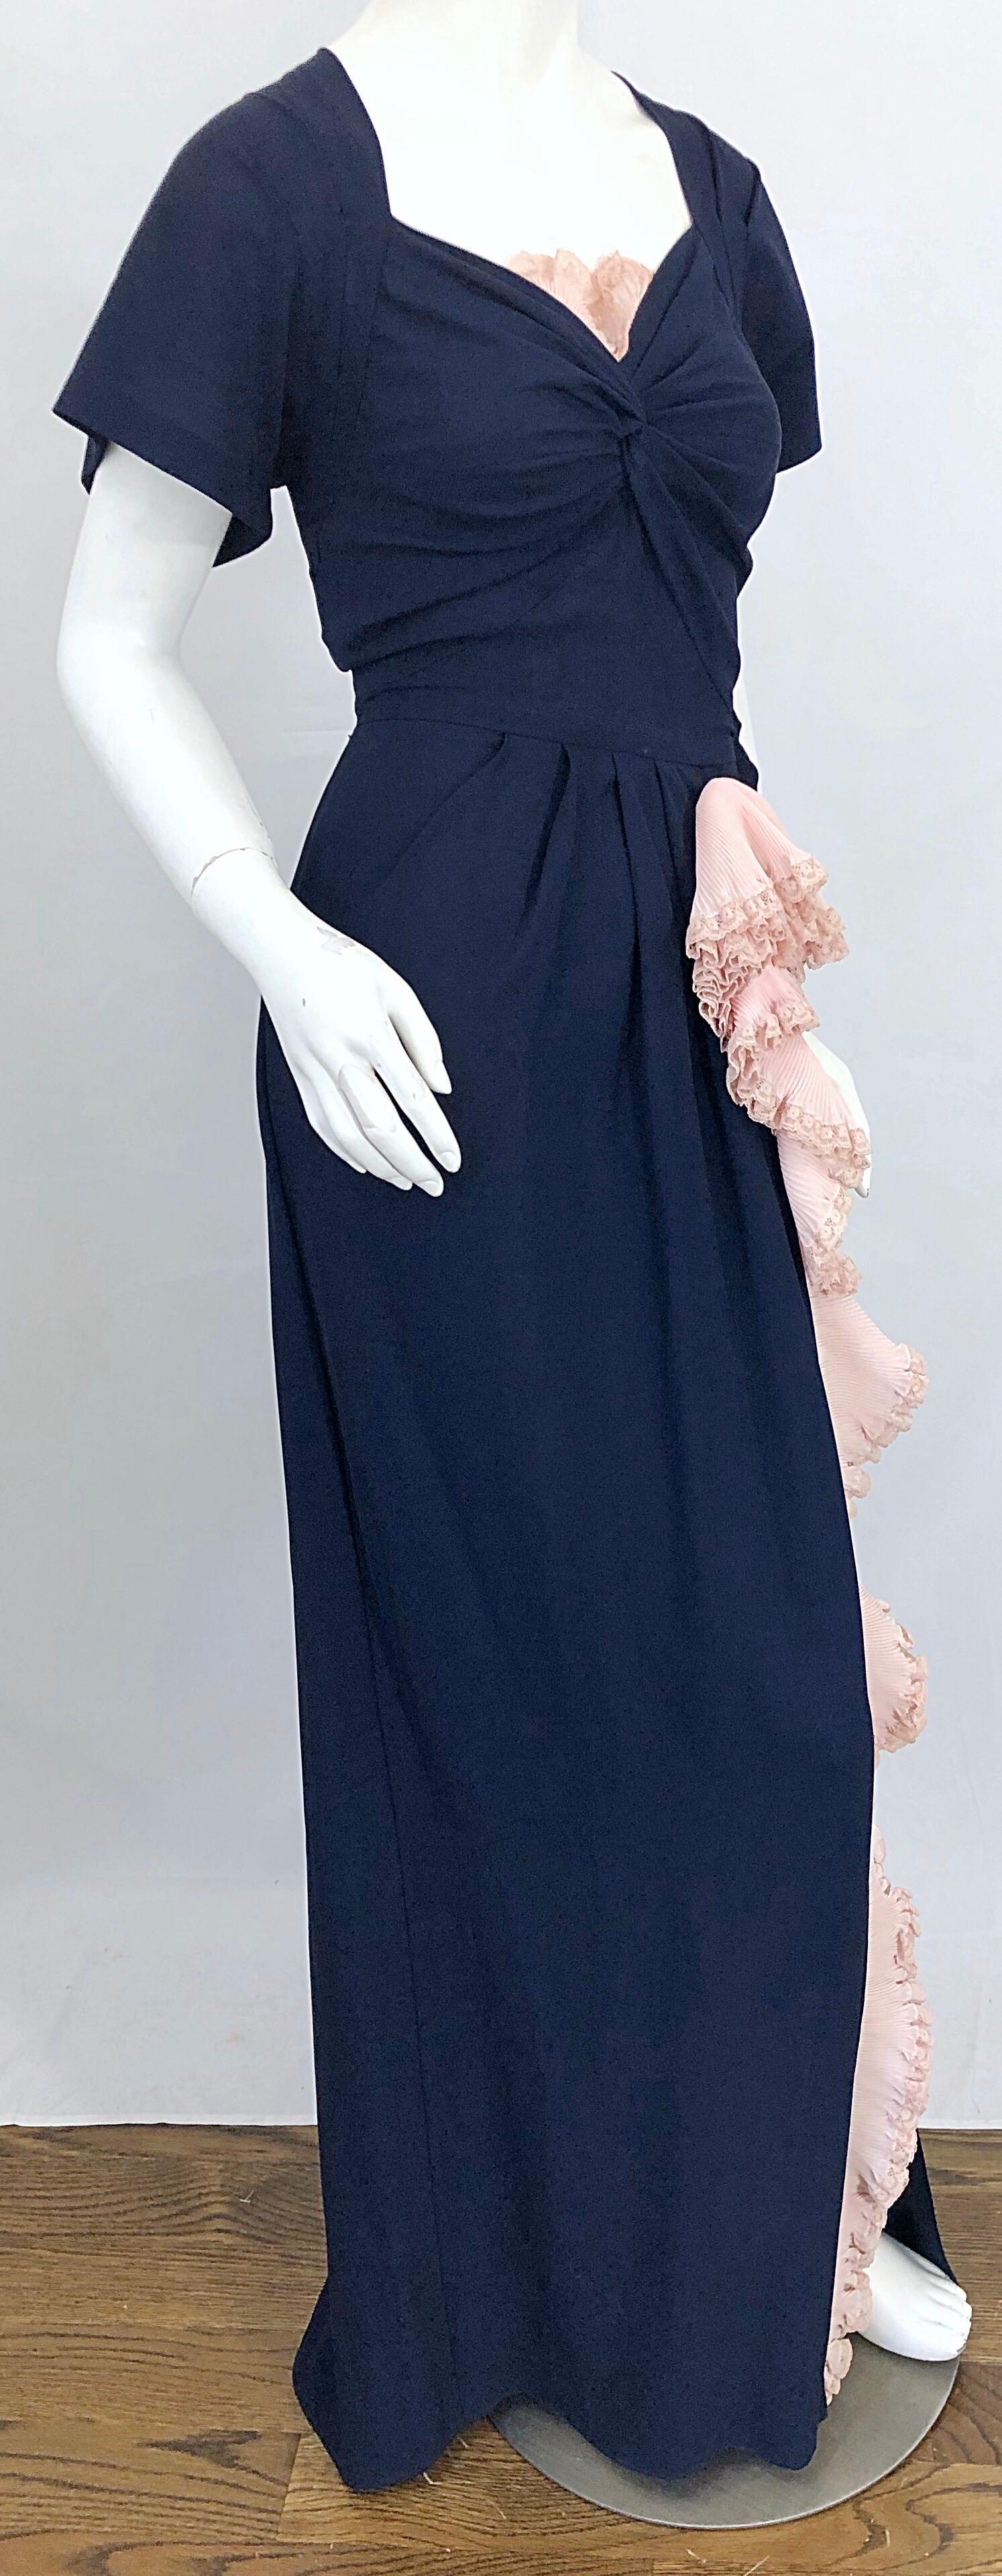 1940s Demi Couture Navy Blue + Pale Pink Short Sleeve 40s Vintage Gown / Dress In Excellent Condition For Sale In San Diego, CA